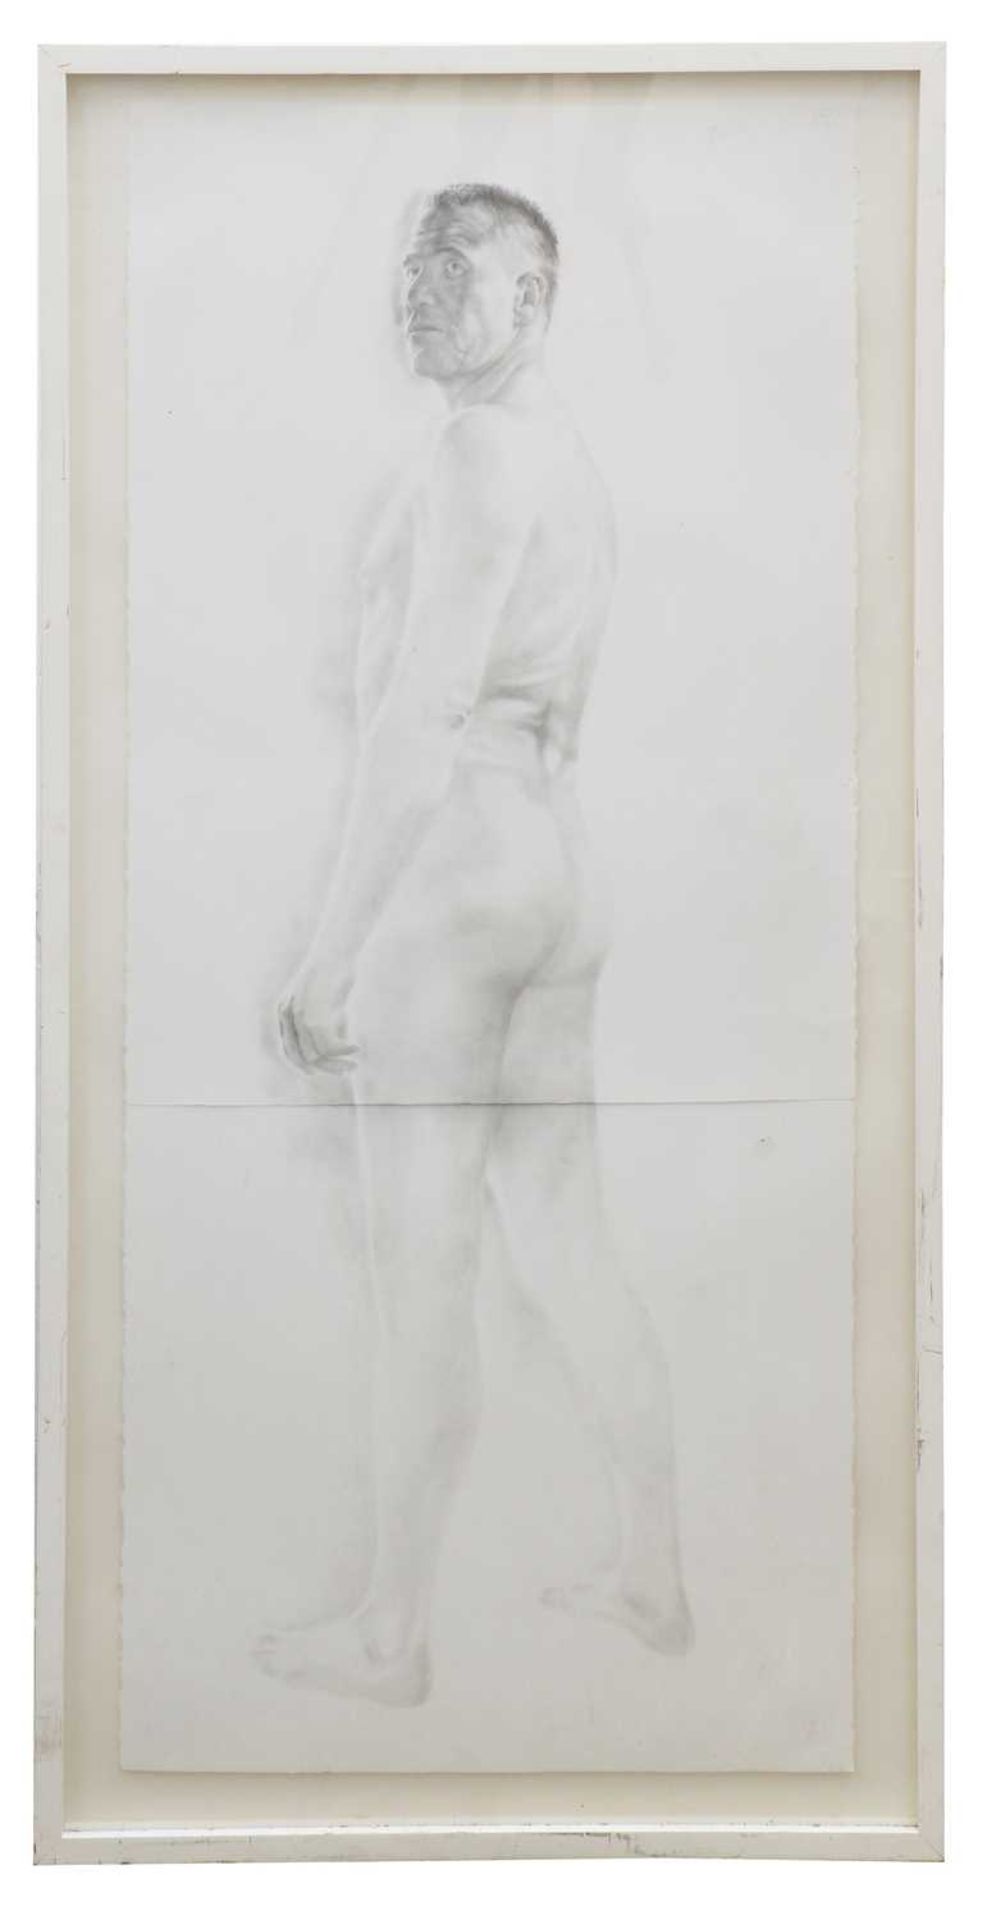 A NUDE PENCIL DRAWING - Image 2 of 3